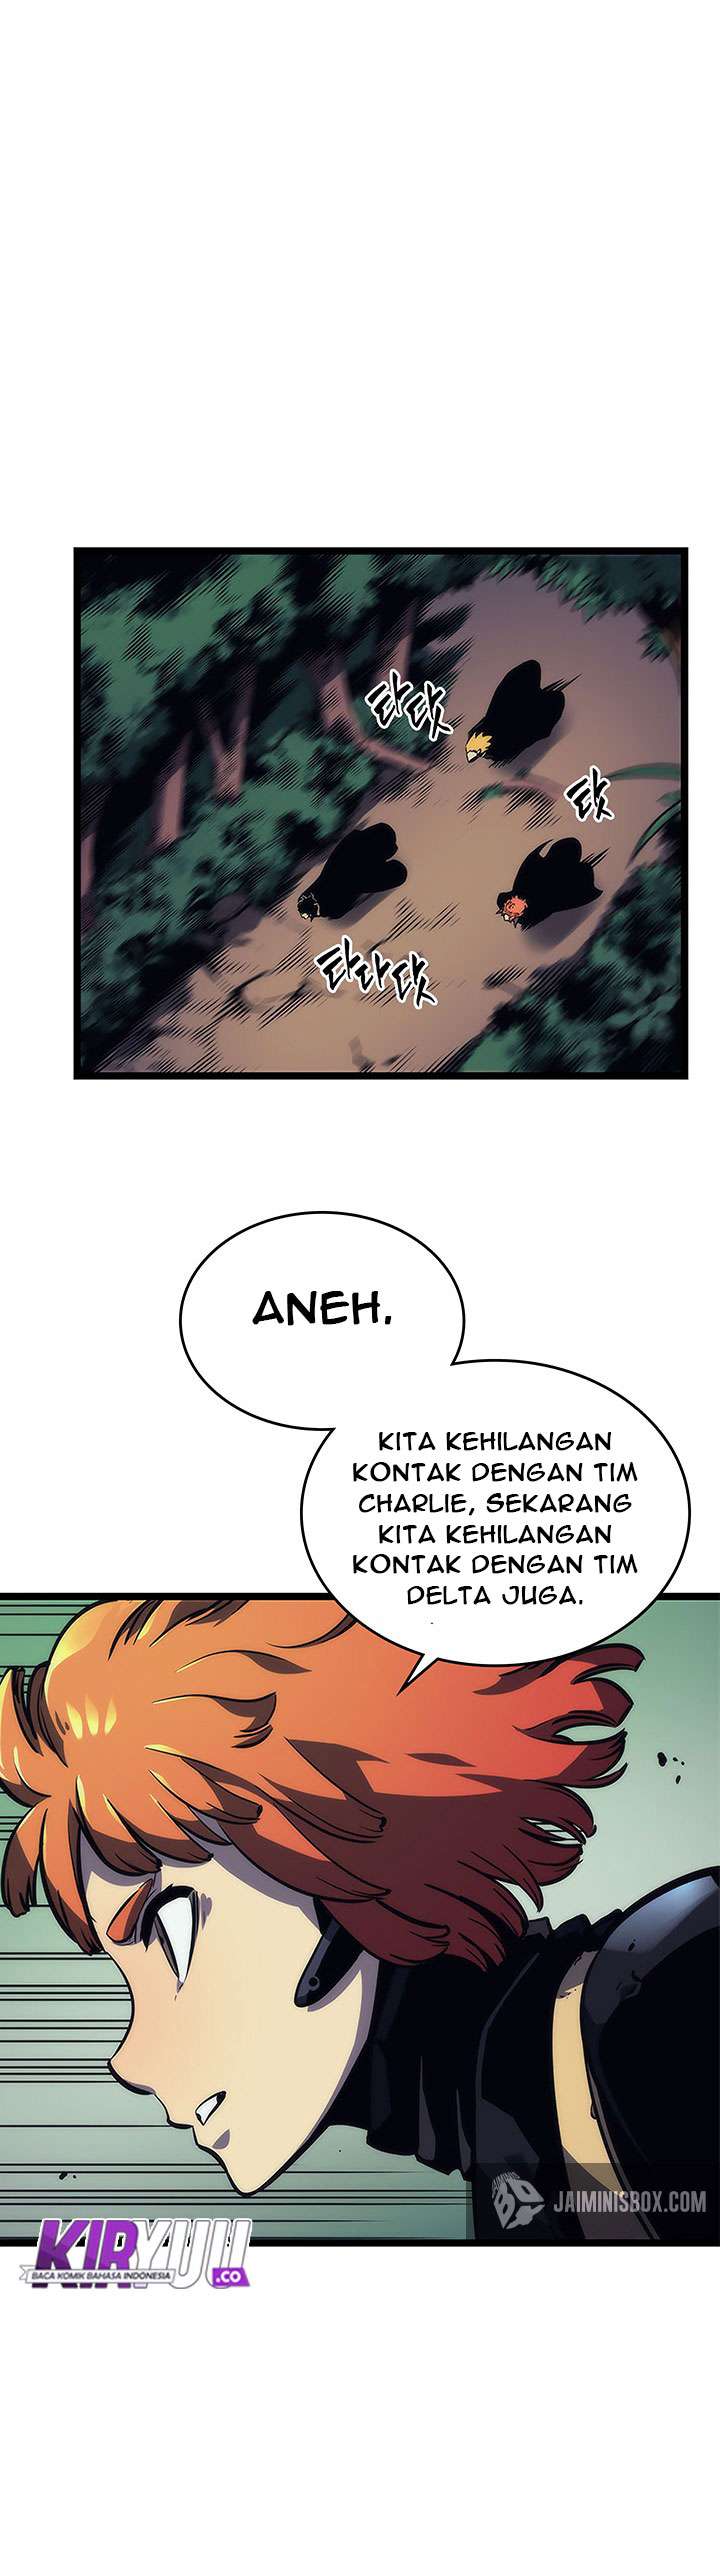 Solo Leveling Chapter 100 Bahasa Indonesia